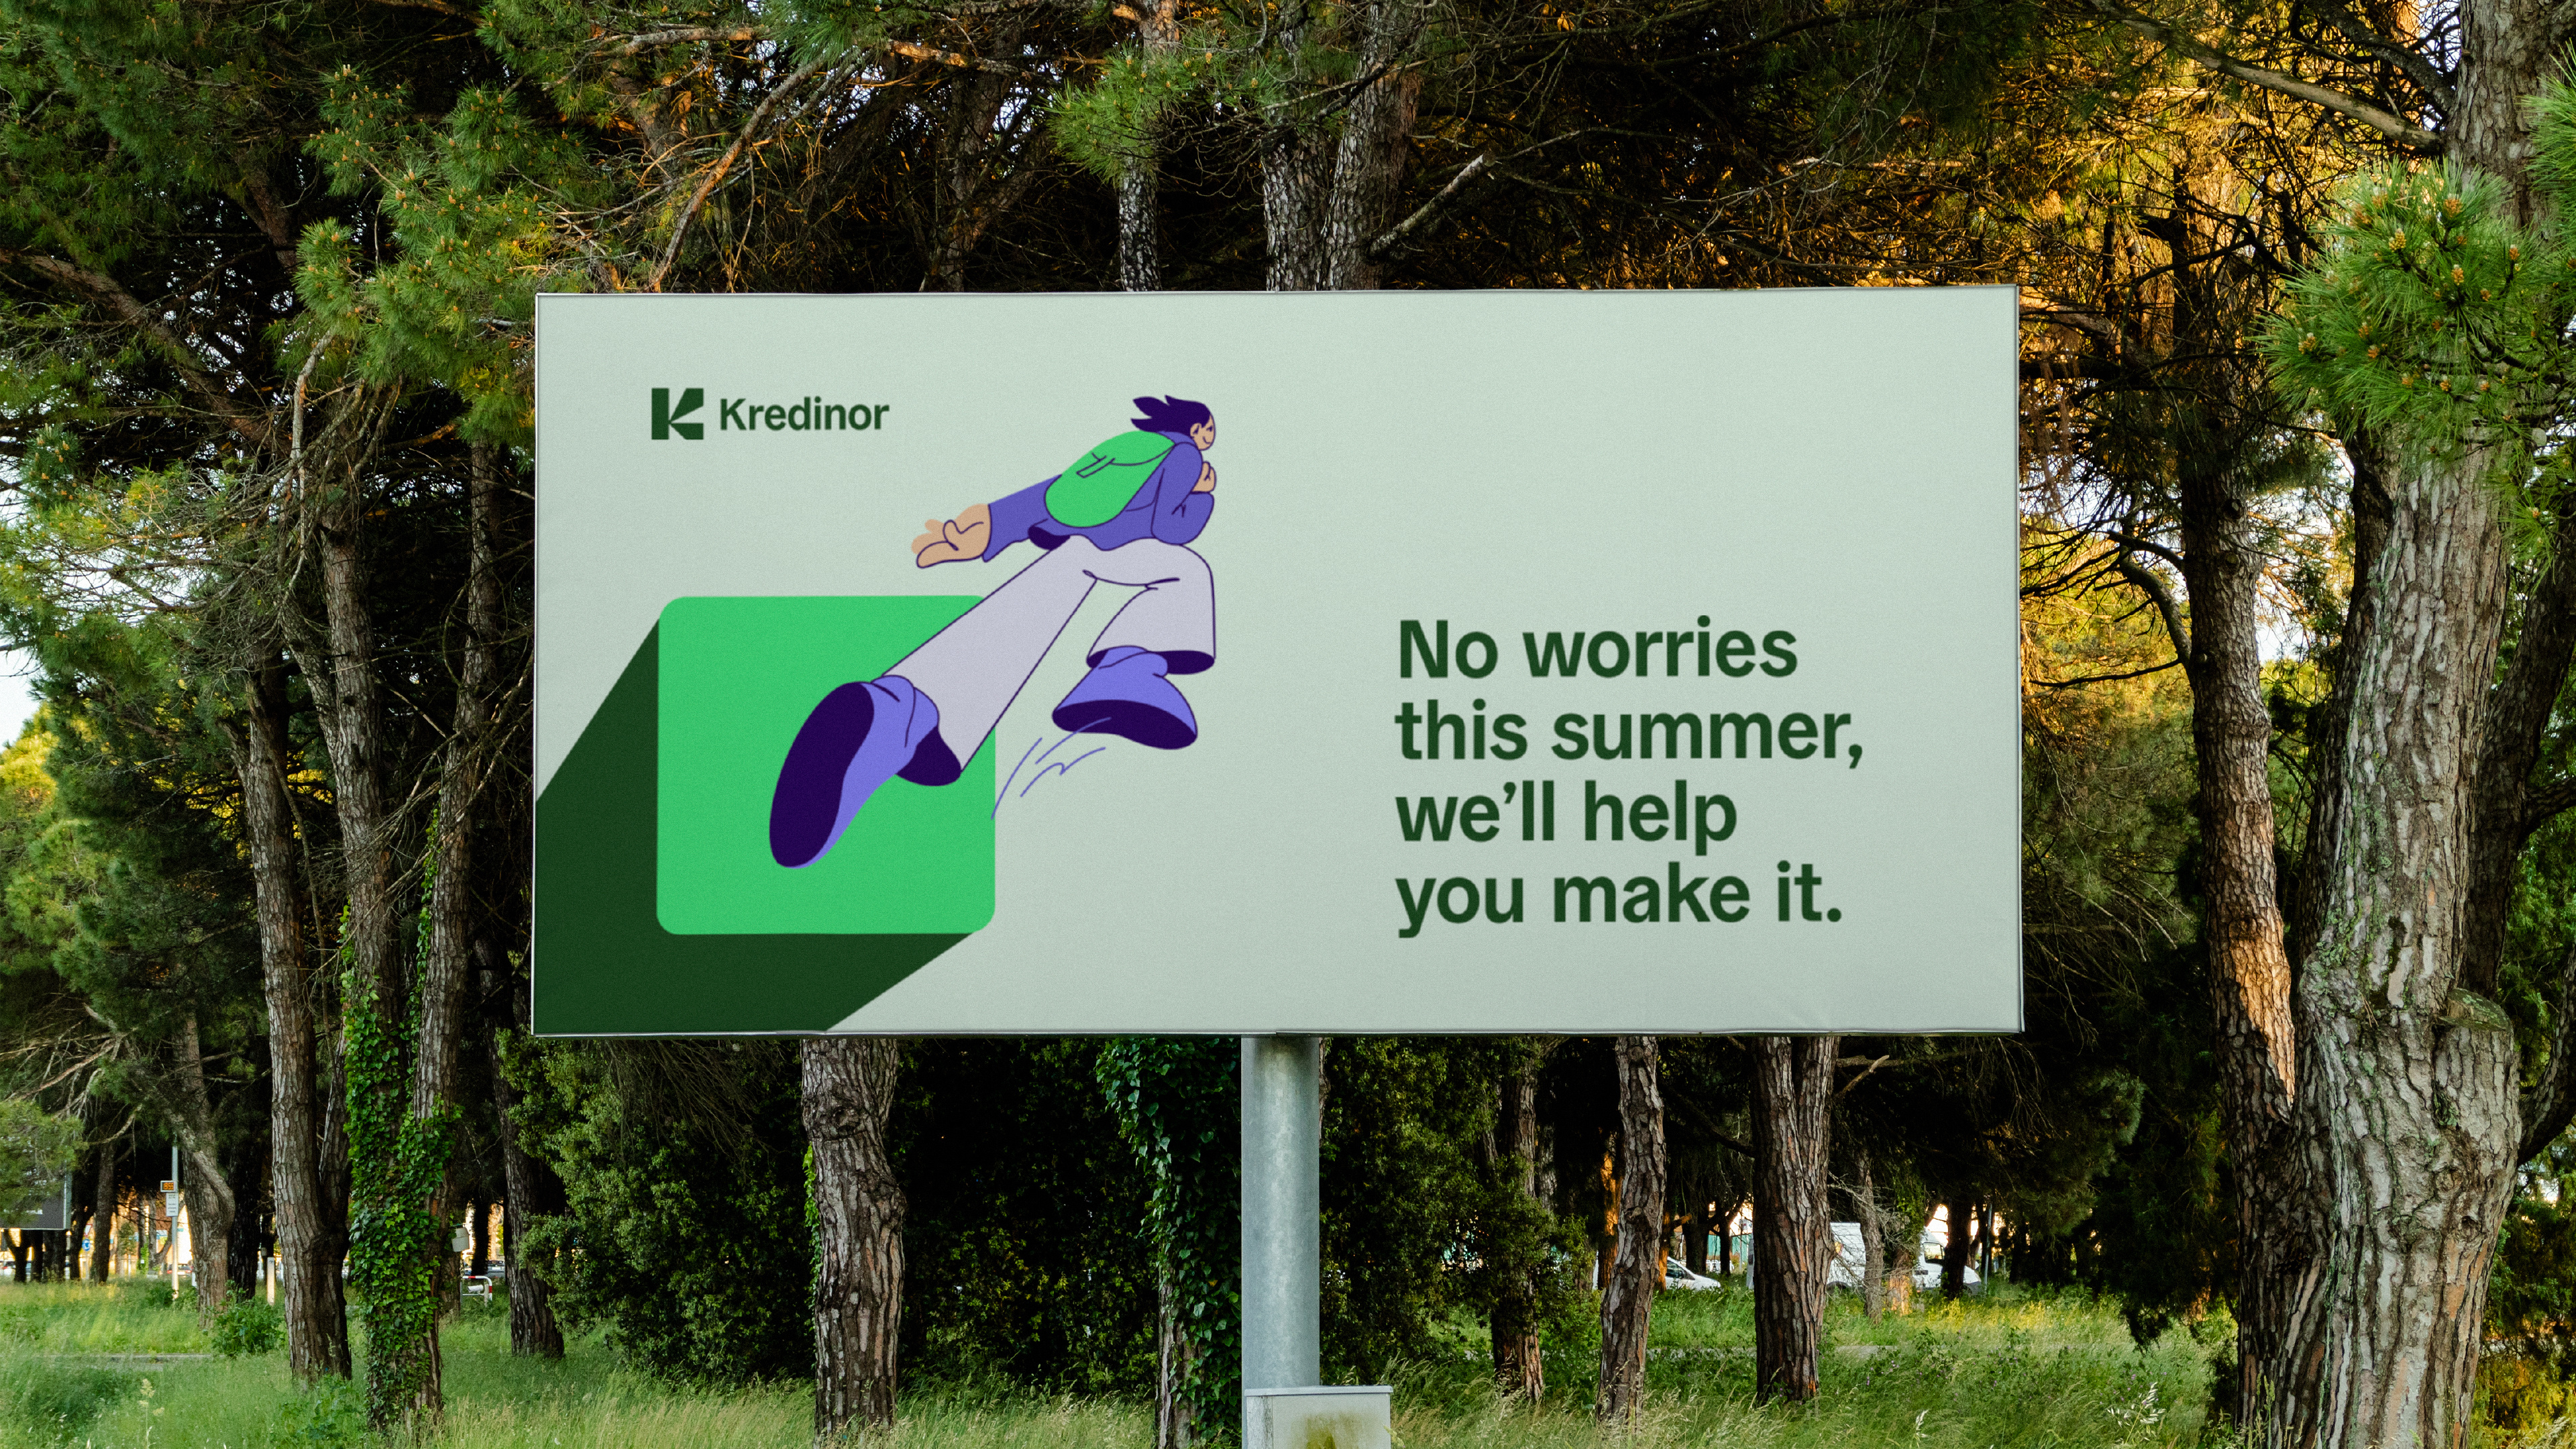 Board for Kredinor. No worries, this summer, we'll help you make it.